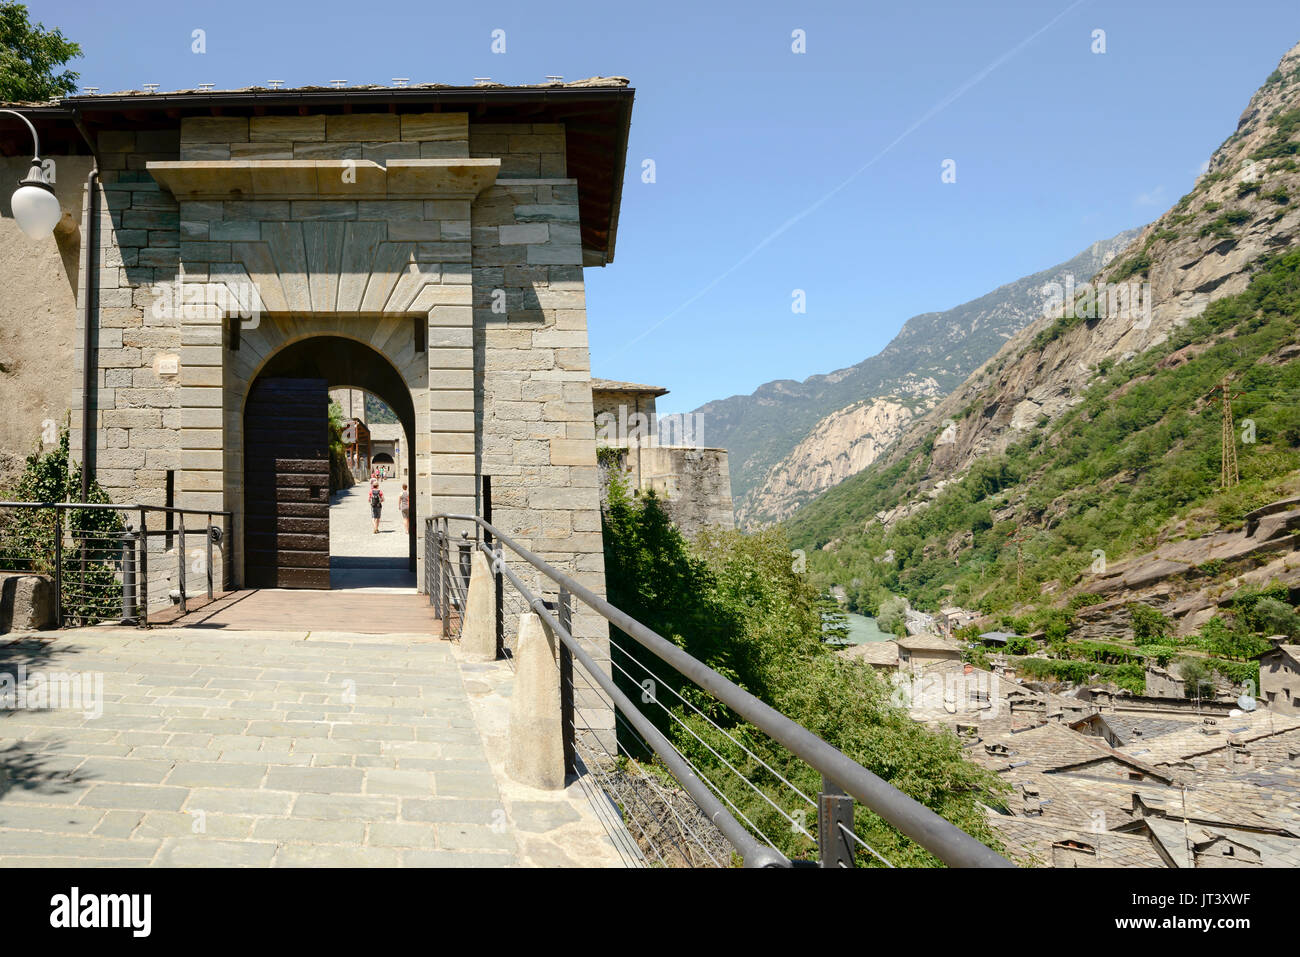 view of fortification entrance at medieval mountain village set in a narrow valley, shot on a bright summer day at Bard, Aosta valley,  Italy Stock Photo